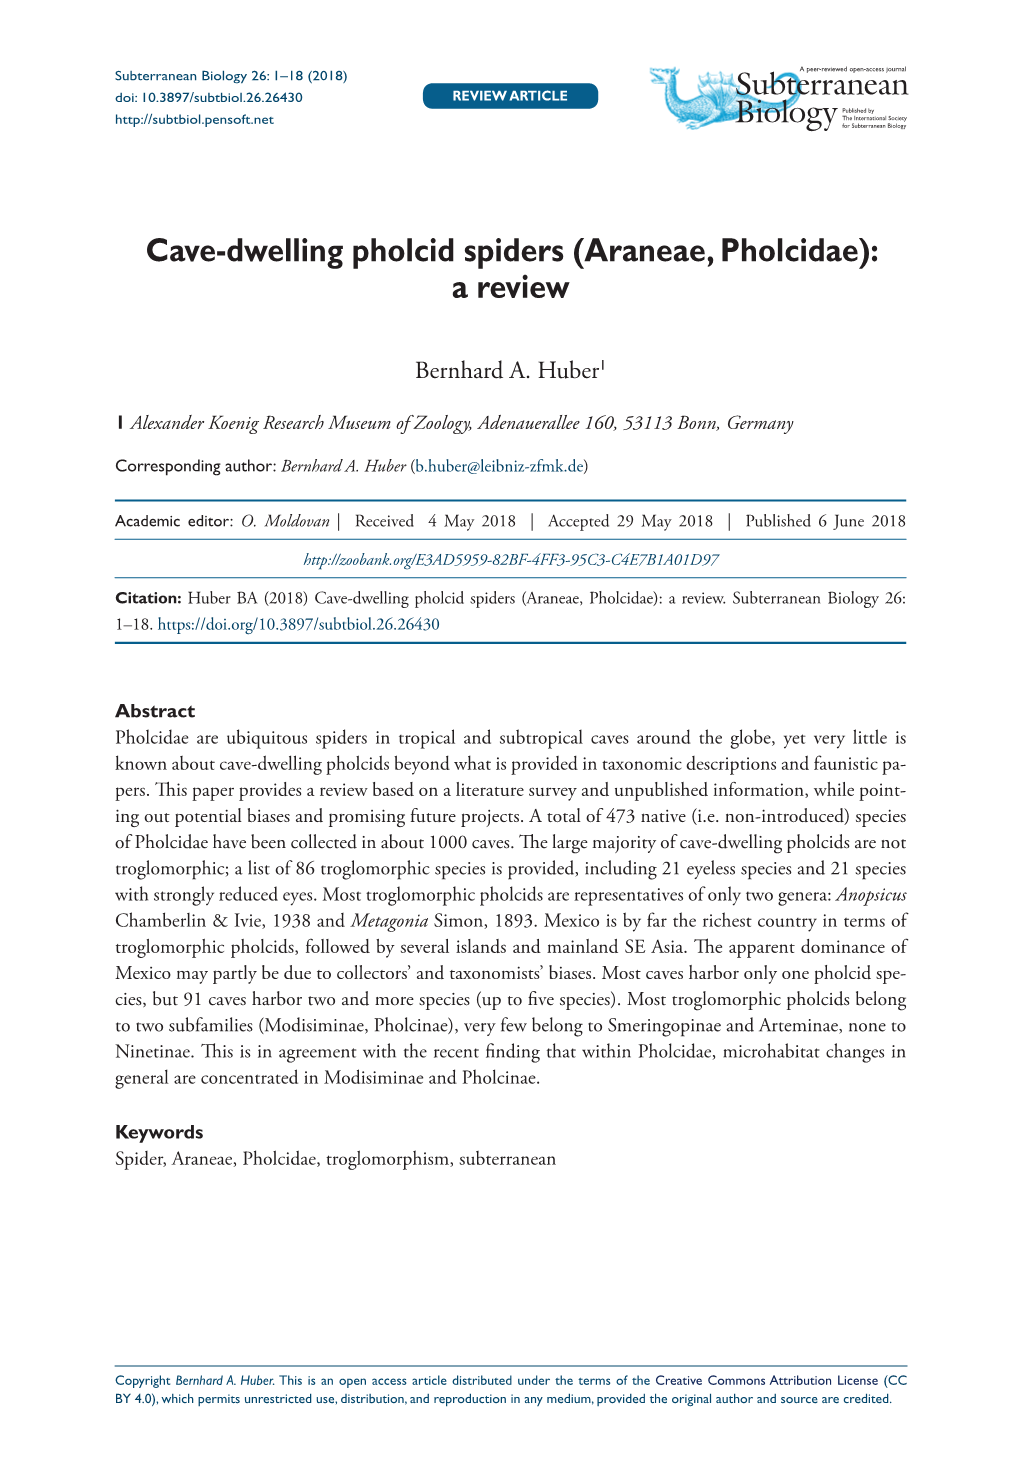 Cave-Dwelling Pholcid Spiders